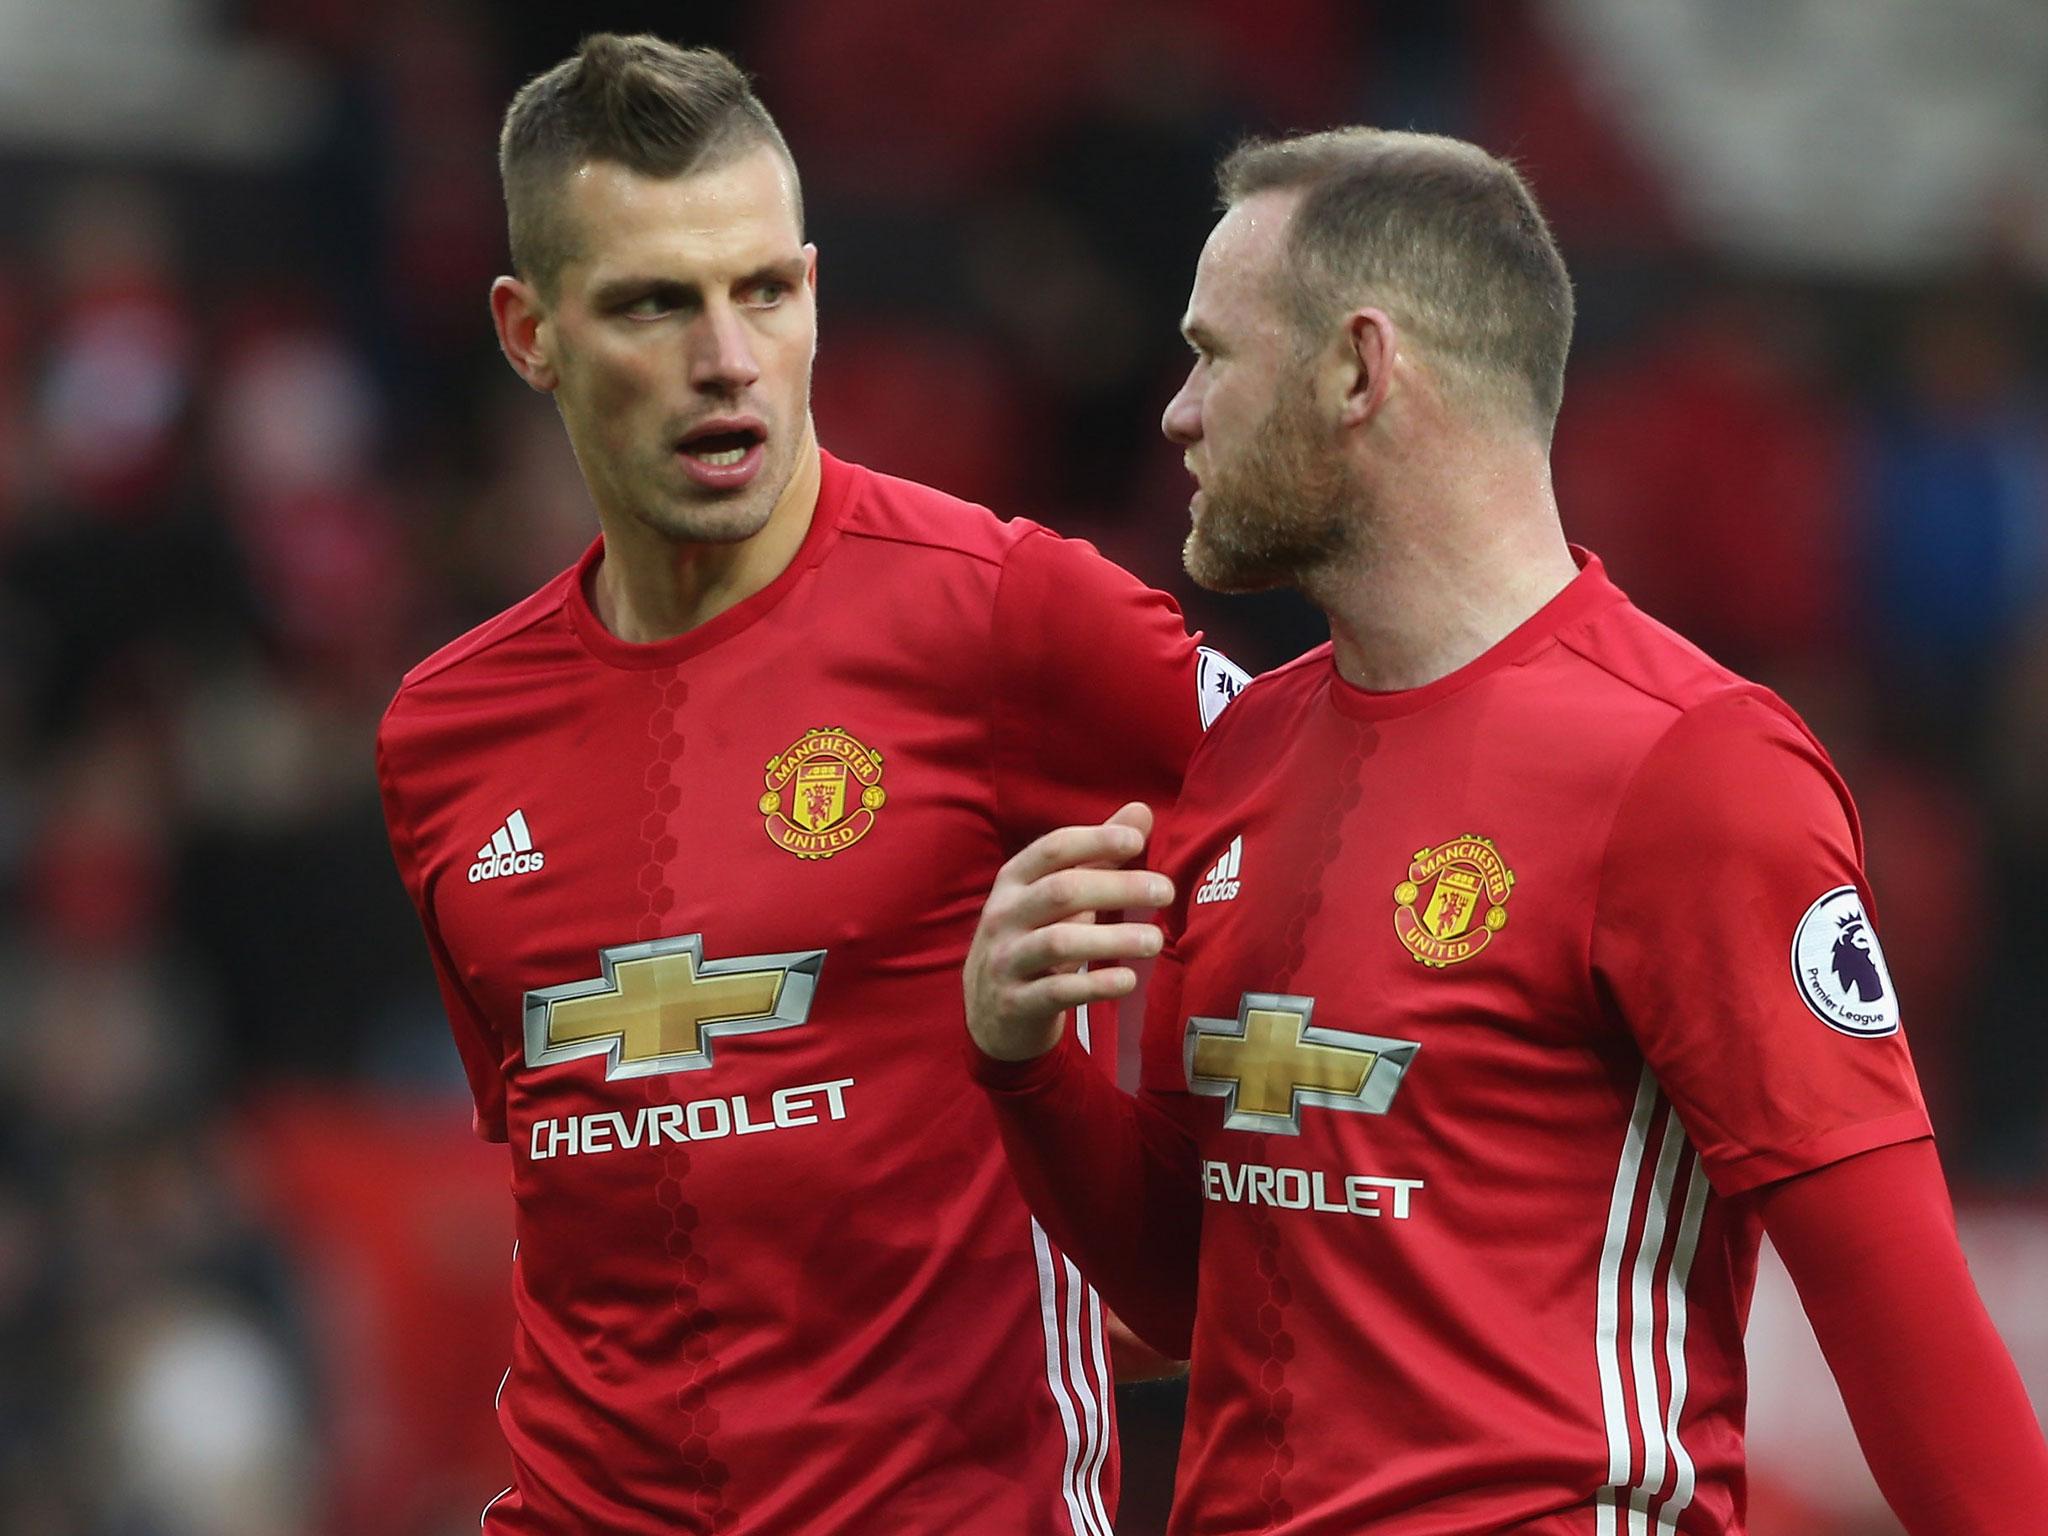 Morgan Schneiderlin looks to be leaving Manchester United in a £22m deal with Everton